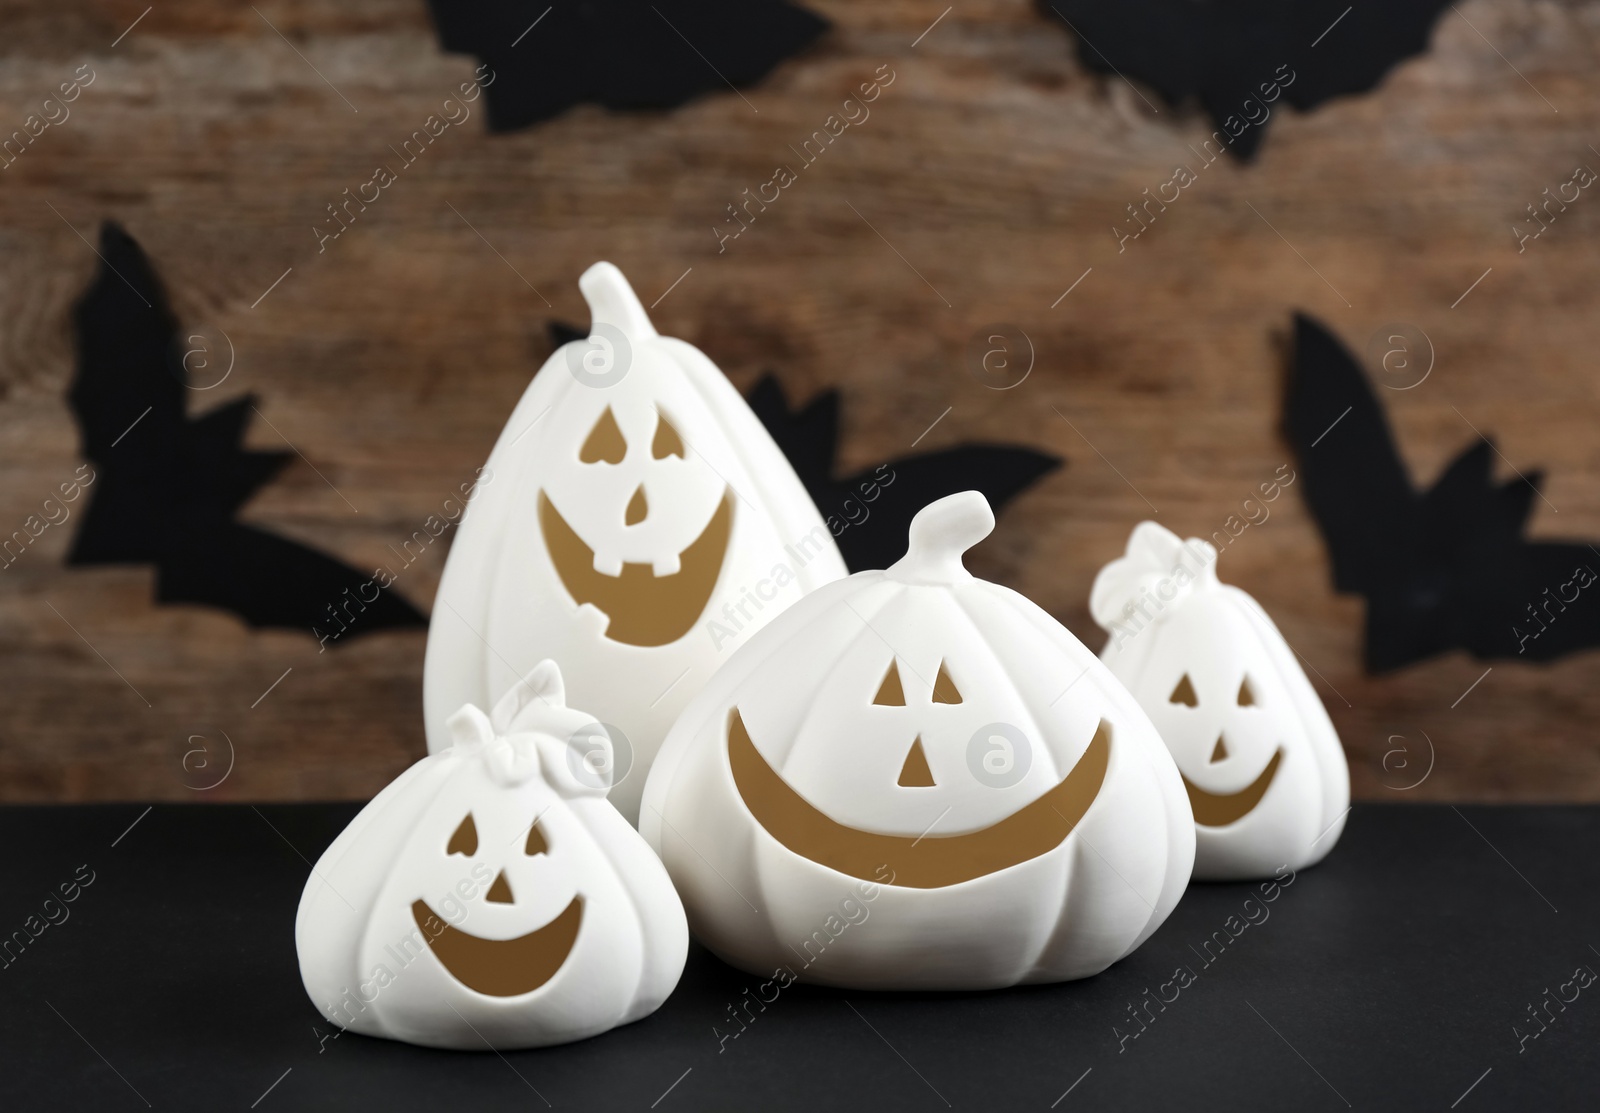 Image of White pumpkin shaped candle holders on black table against wooden wall with paper bats. Halloween decoration